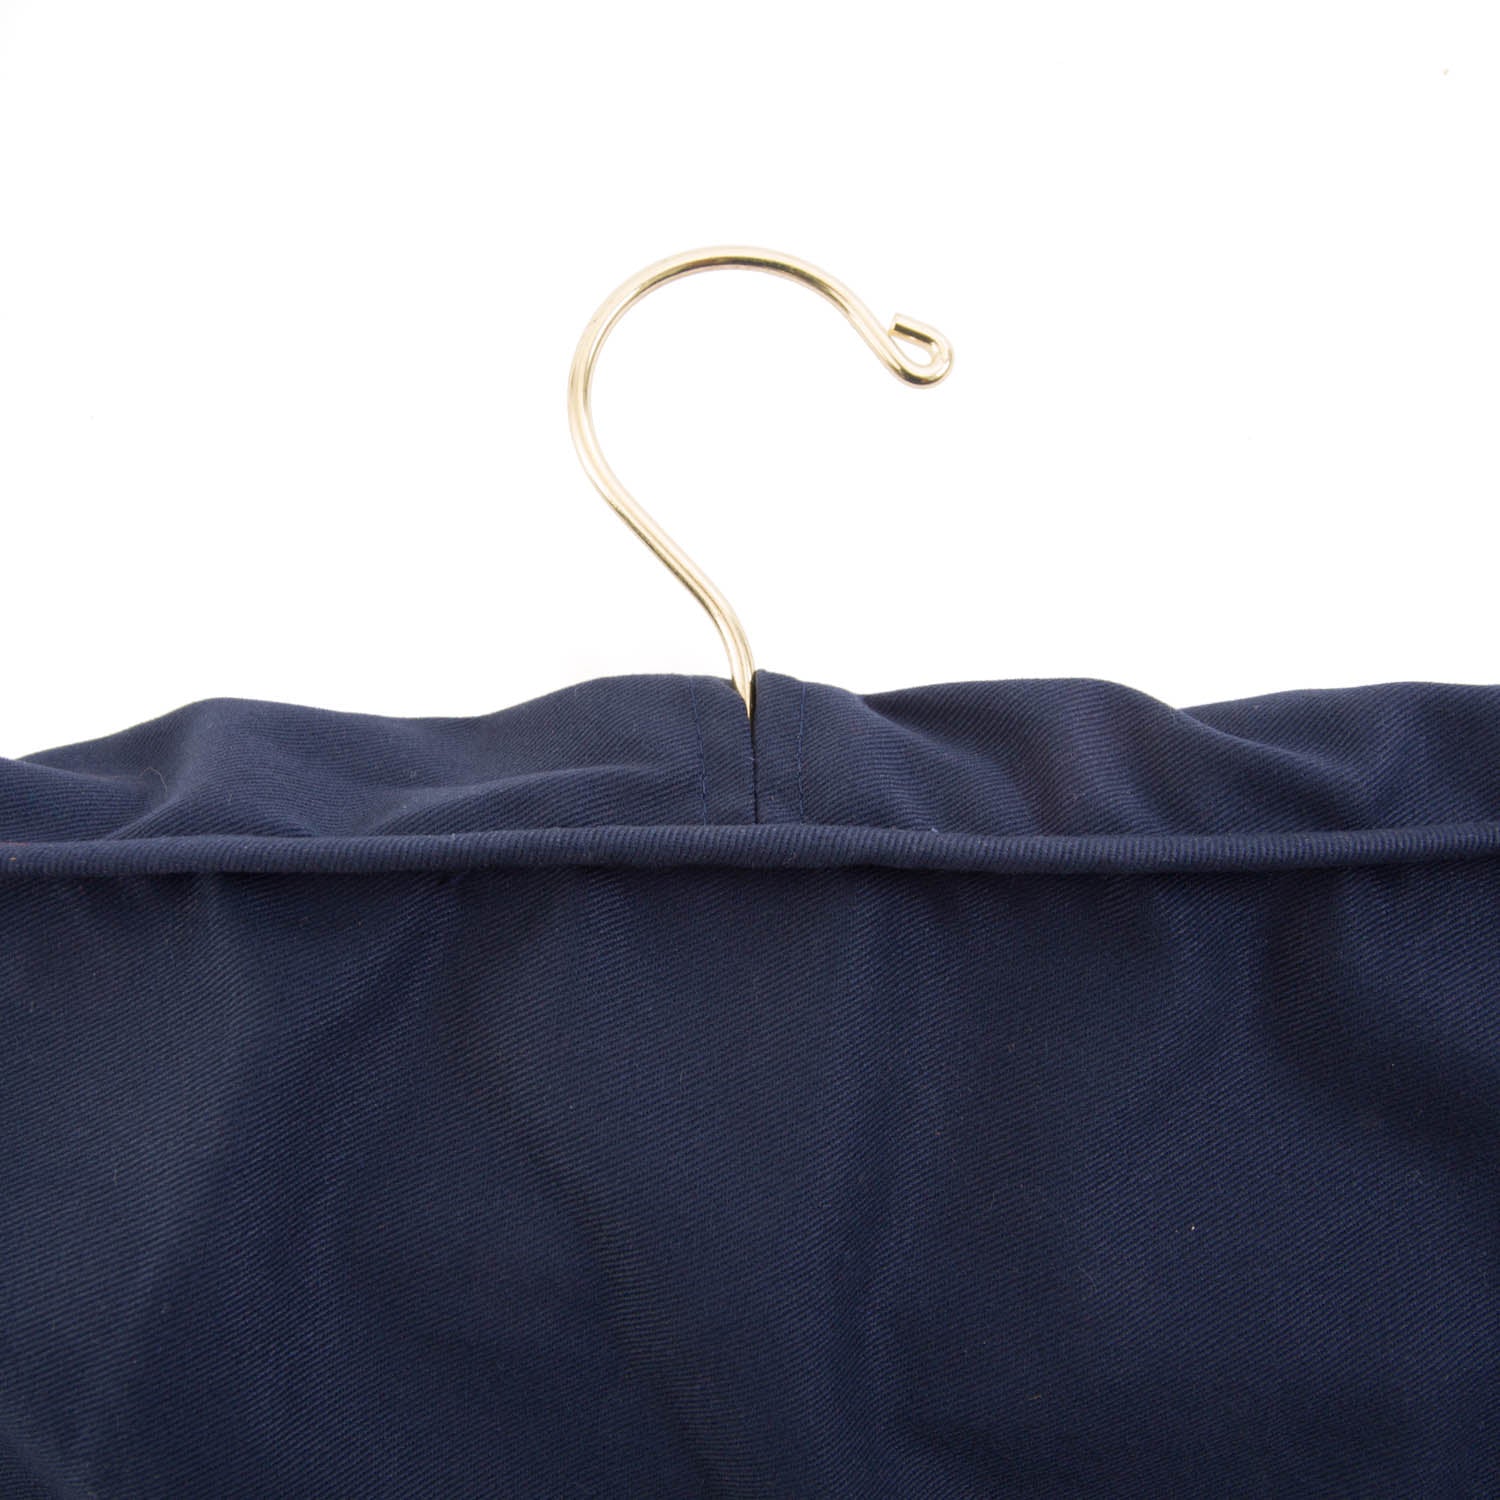 A blue KirbyAllison.com garment hanger for a closet featuring the Deluxe Cotton Twill Trouser Dust Cover.